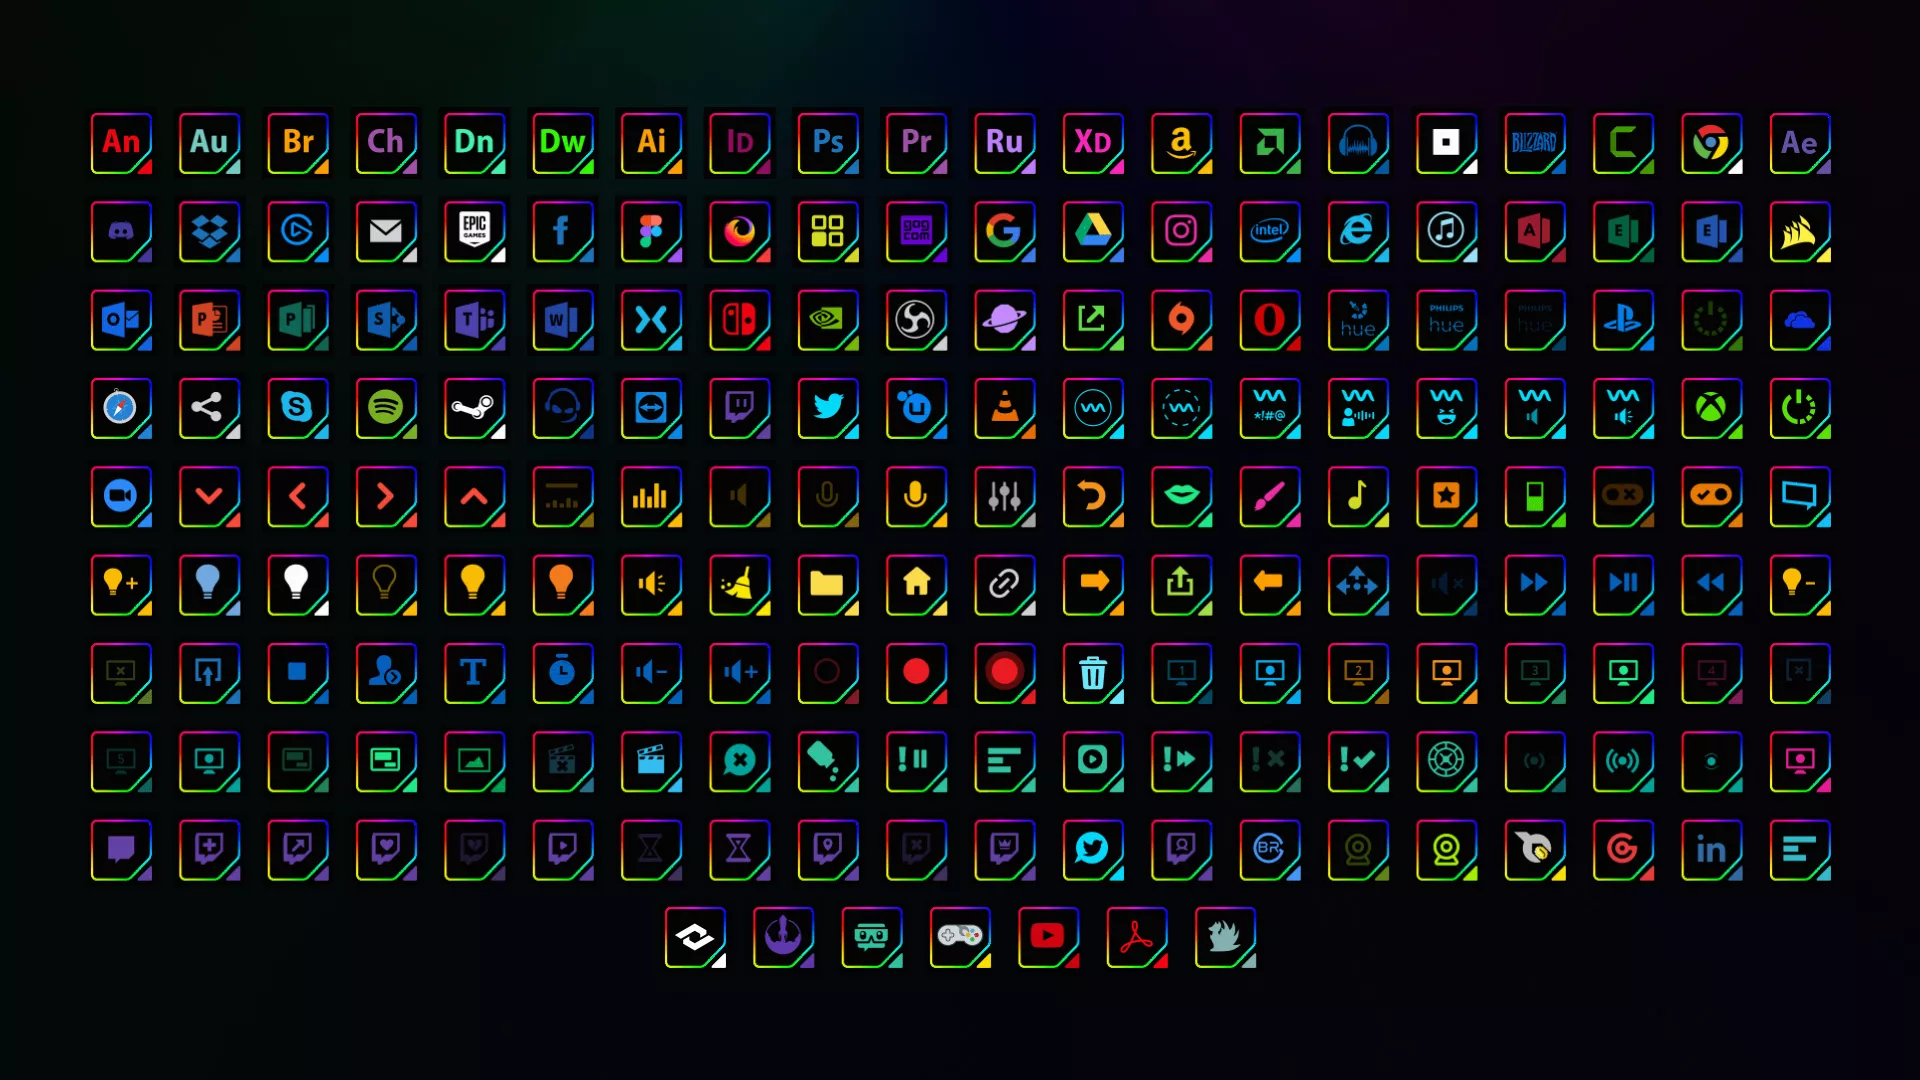 Clarity - Stream Deck and Touch Portal Key Icons - Image #4